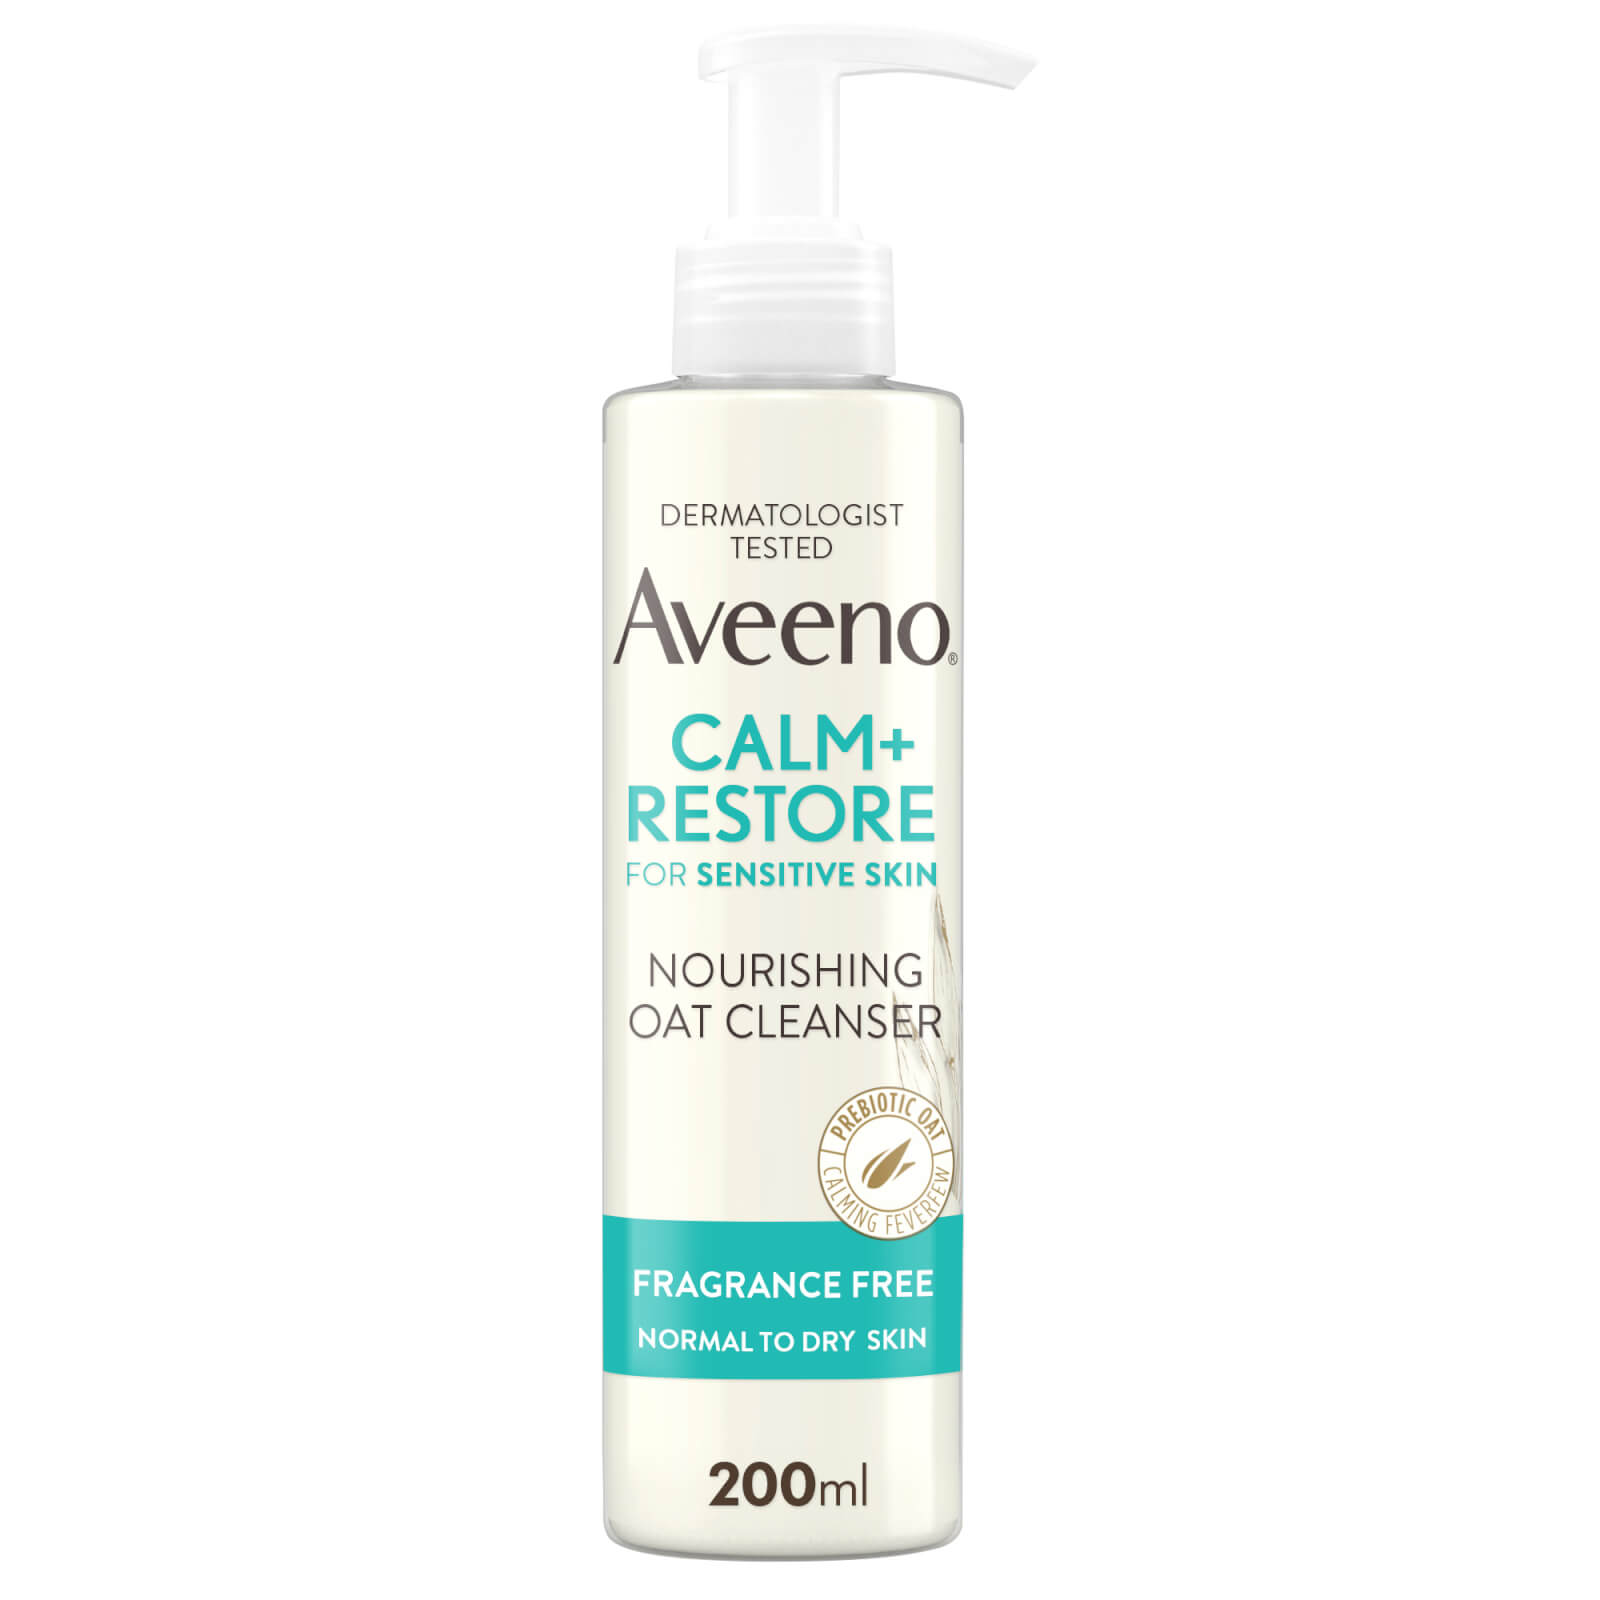 Photos - Facial / Body Cleansing Product Aveeno Face Calm and Restore Nourishing Oat Cleanser 200ml 29525 